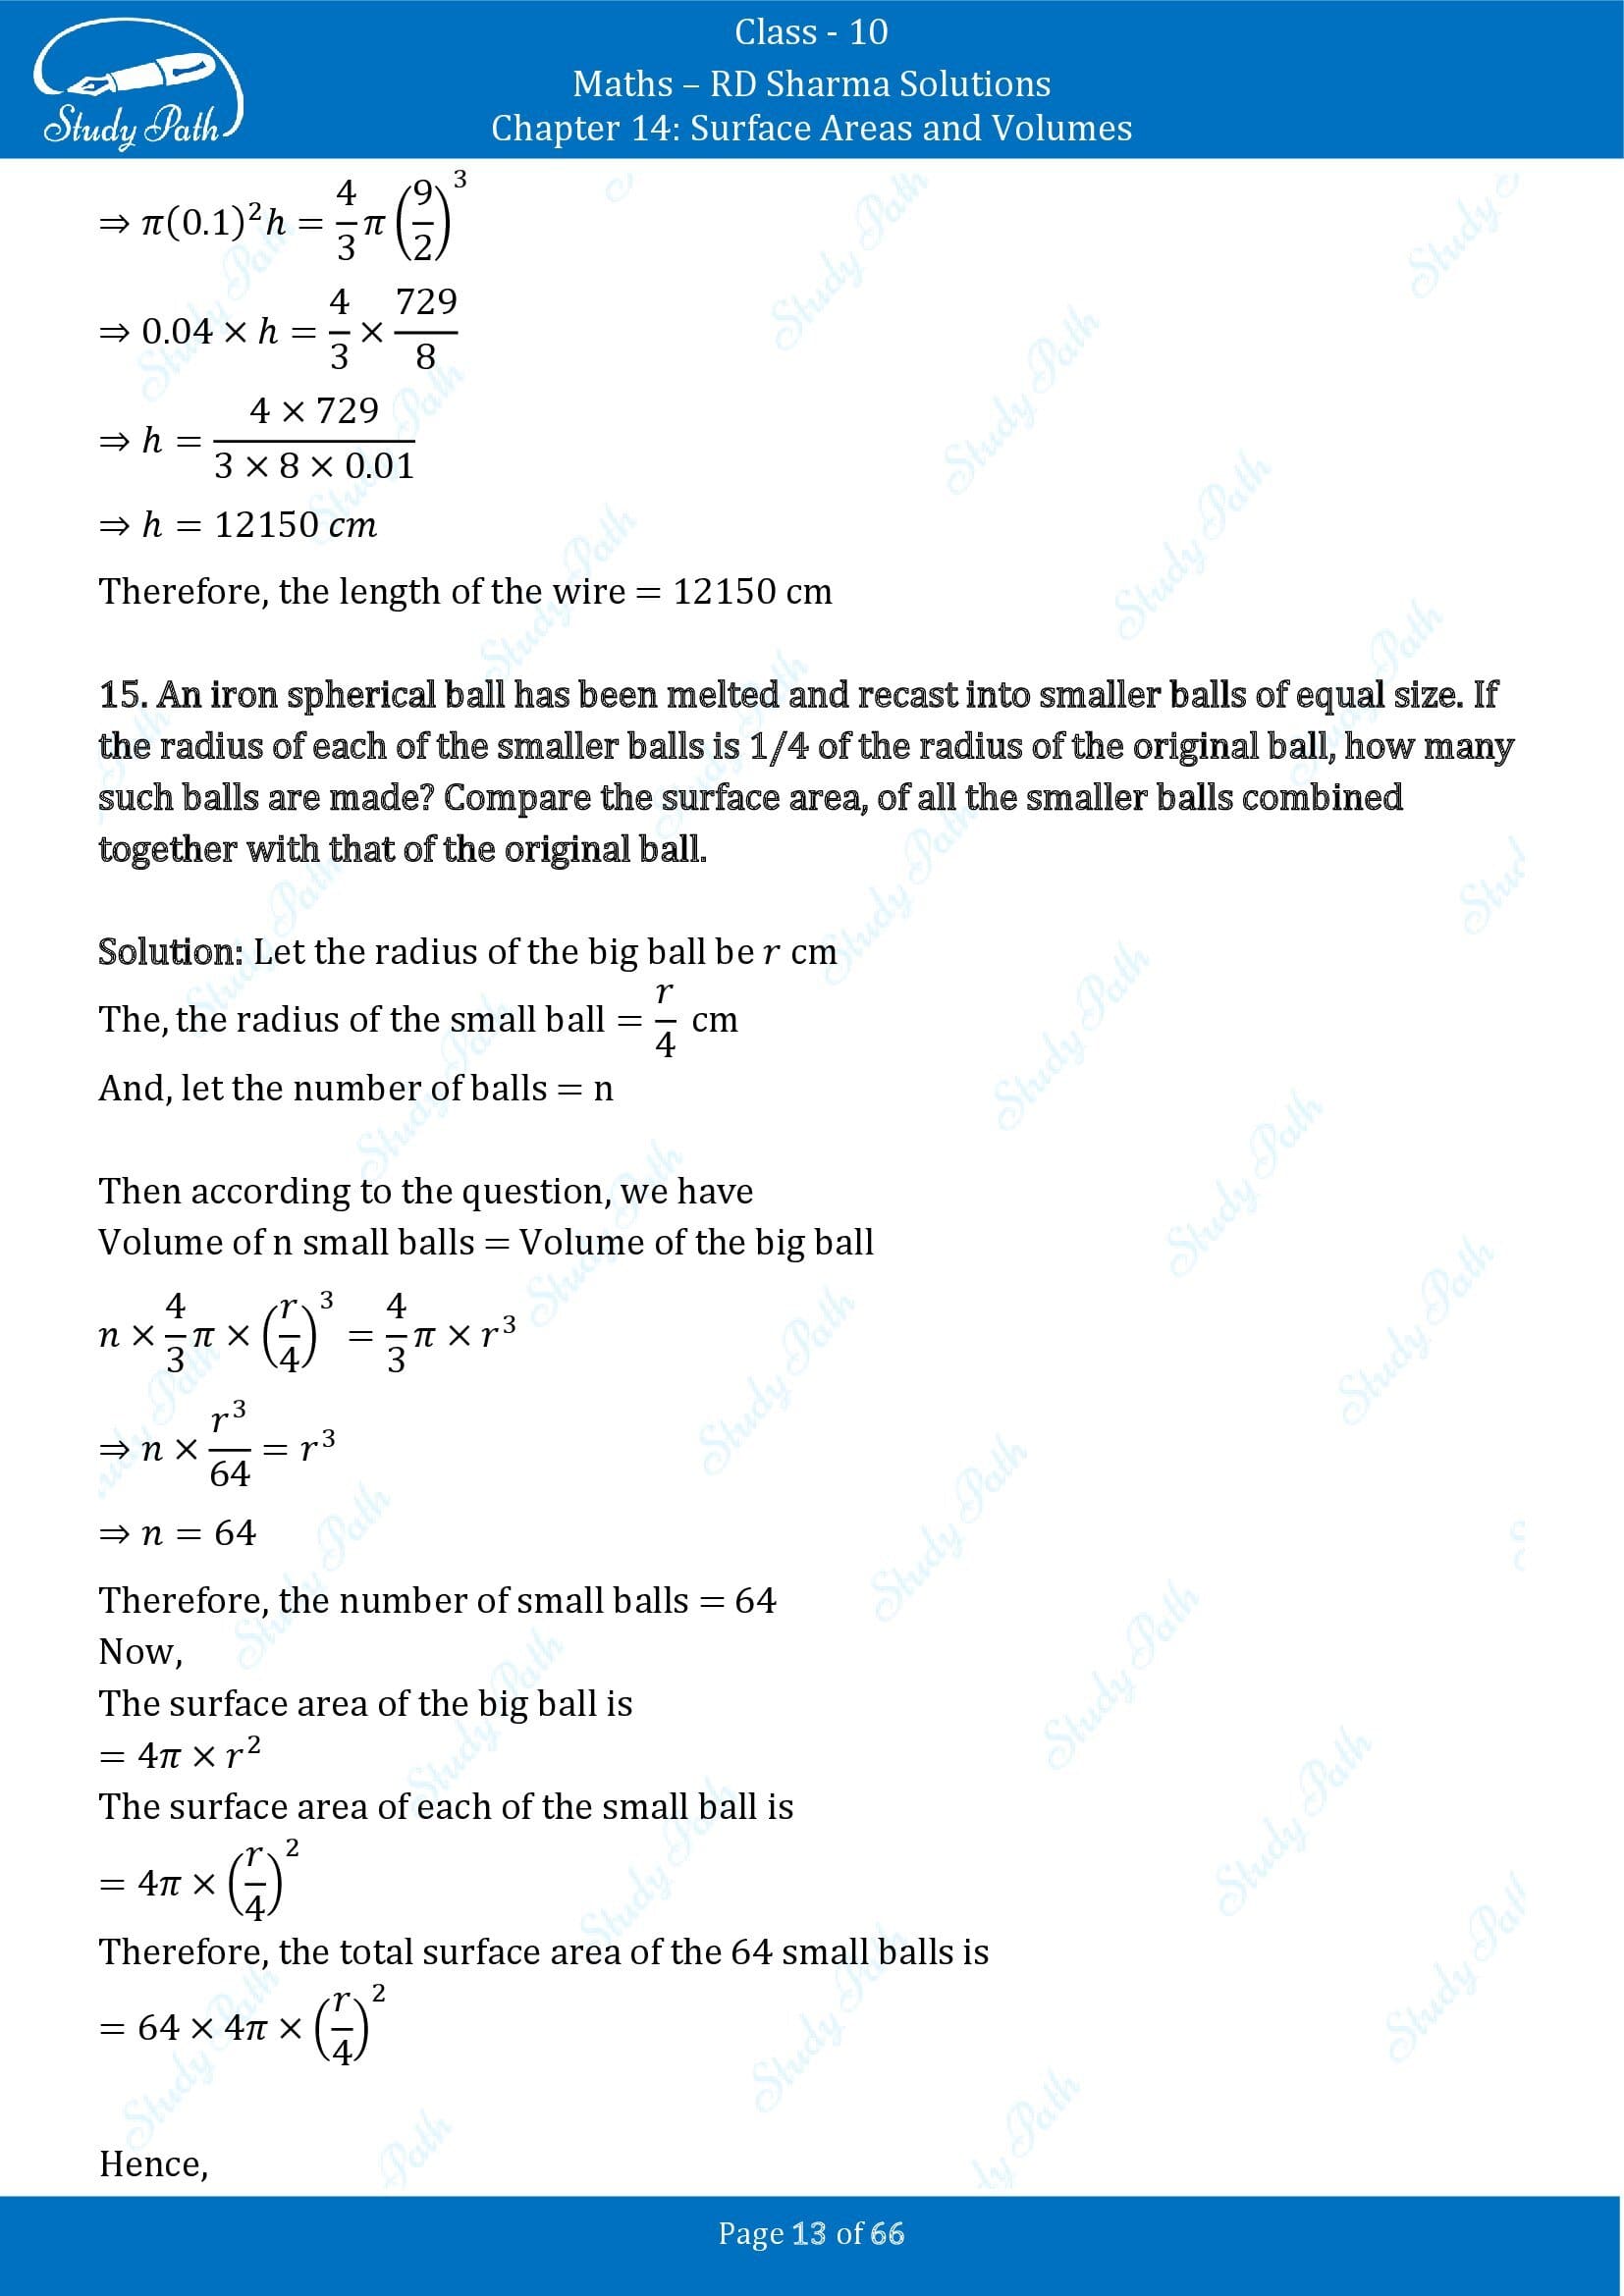 RD Sharma Solutions Class 10 Chapter 14 Surface Areas and Volumes Exercise 14.1 00013